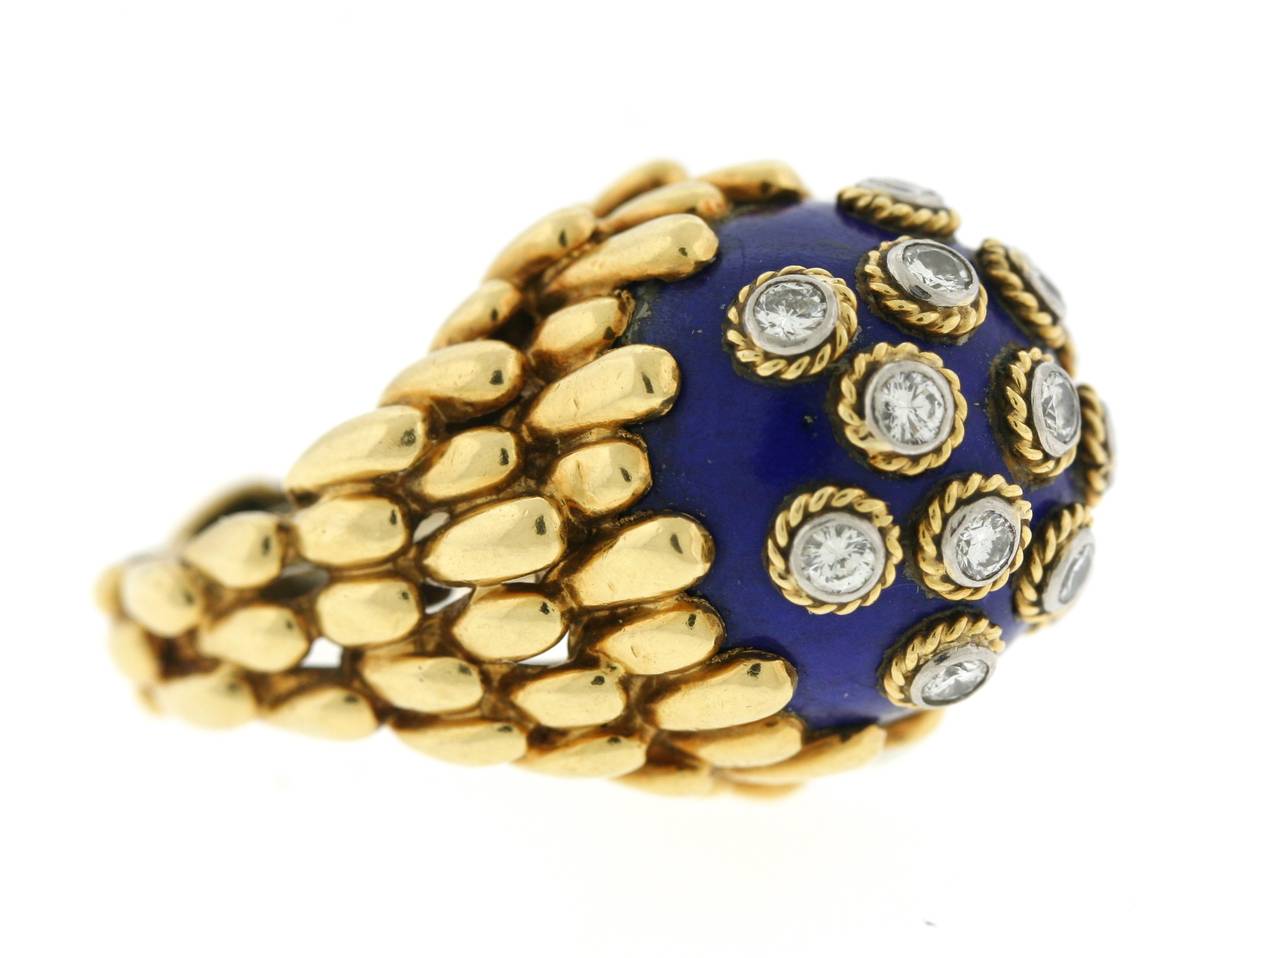 David Webb 18k gold ring centering a spherical lapis stone set with thirteen diamonds in twisted gold and platinum bezel settings. Total approximate diamond weight is .65cts. The specific gold work in the setting and the technique of placing